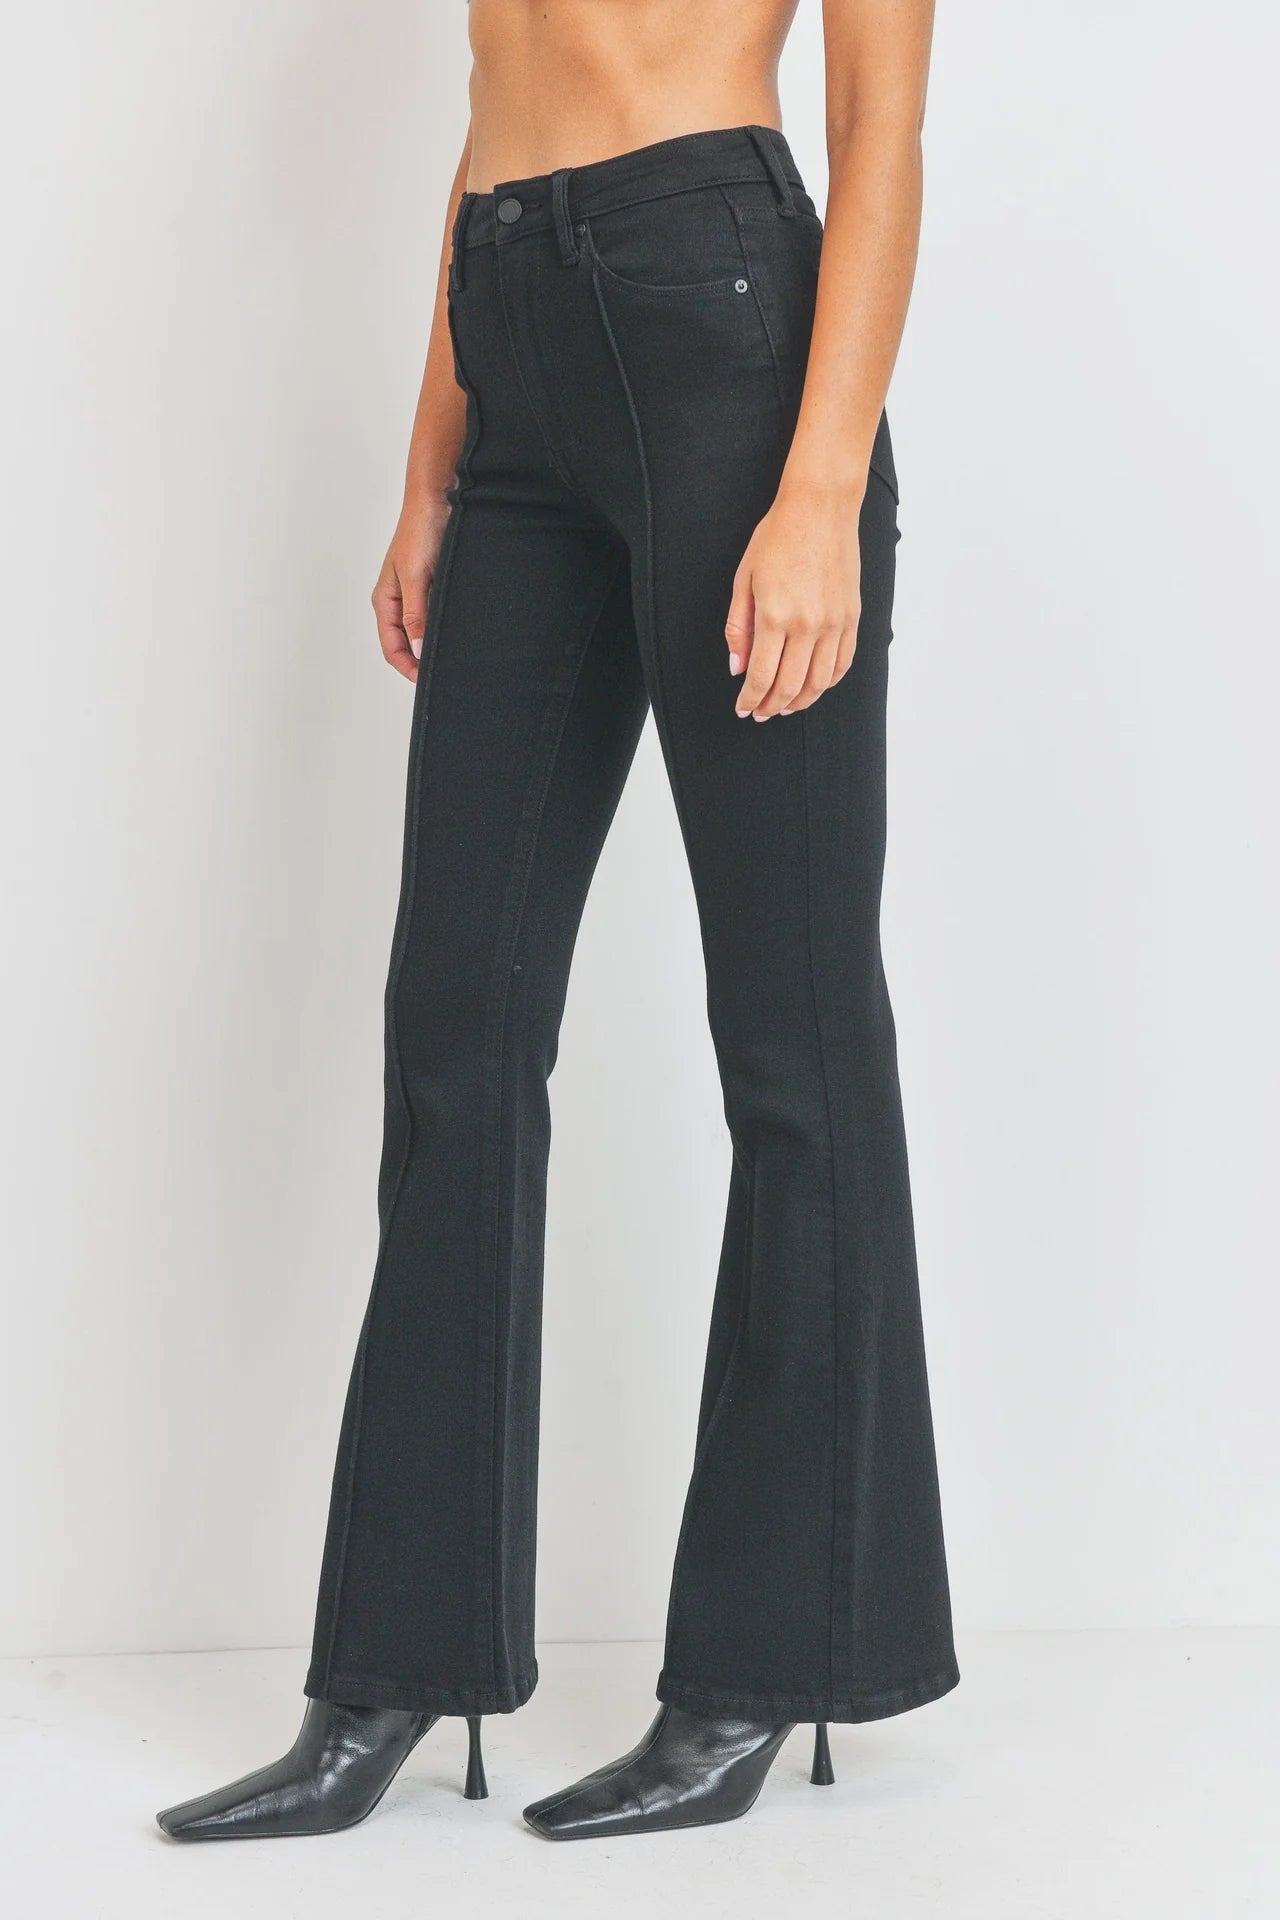 Jeans Pintuck Classy Flare